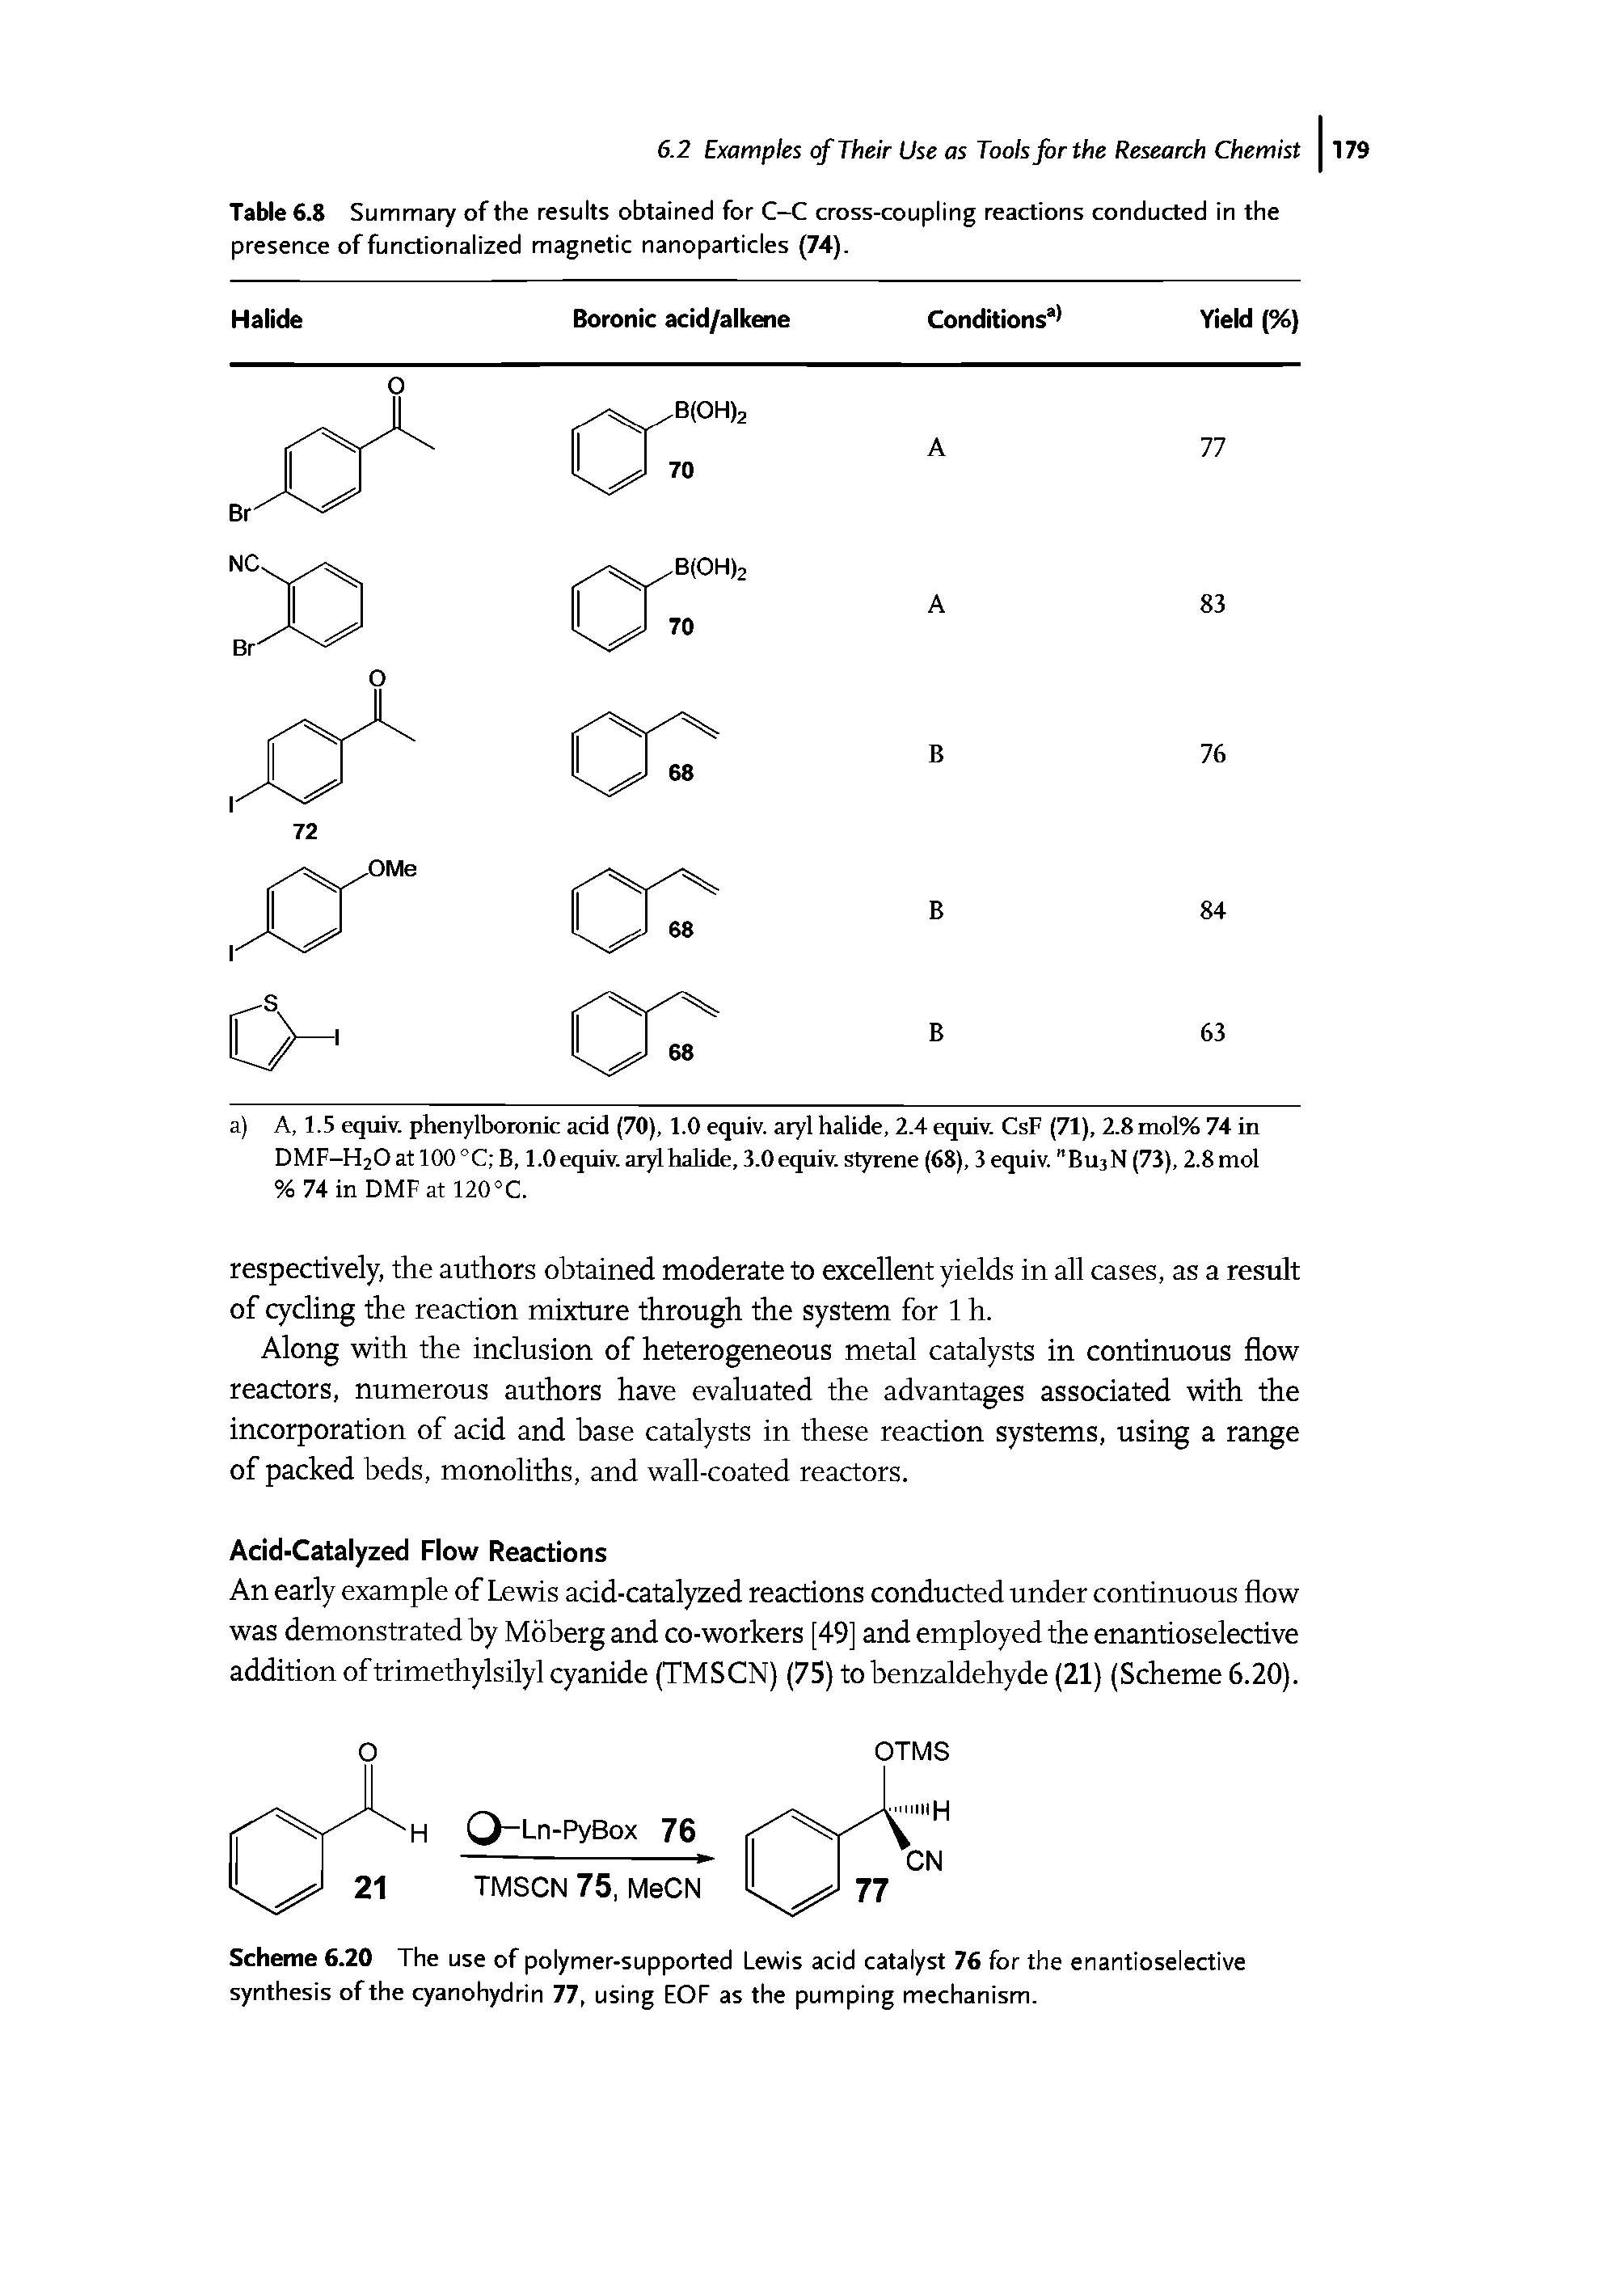 Scheme 6.20 The use of polymer-supported Lewis acid catalyst 76 for the enantioselective synthesis of the cyanohydrin 77, using EOF as the pumping mechanism.